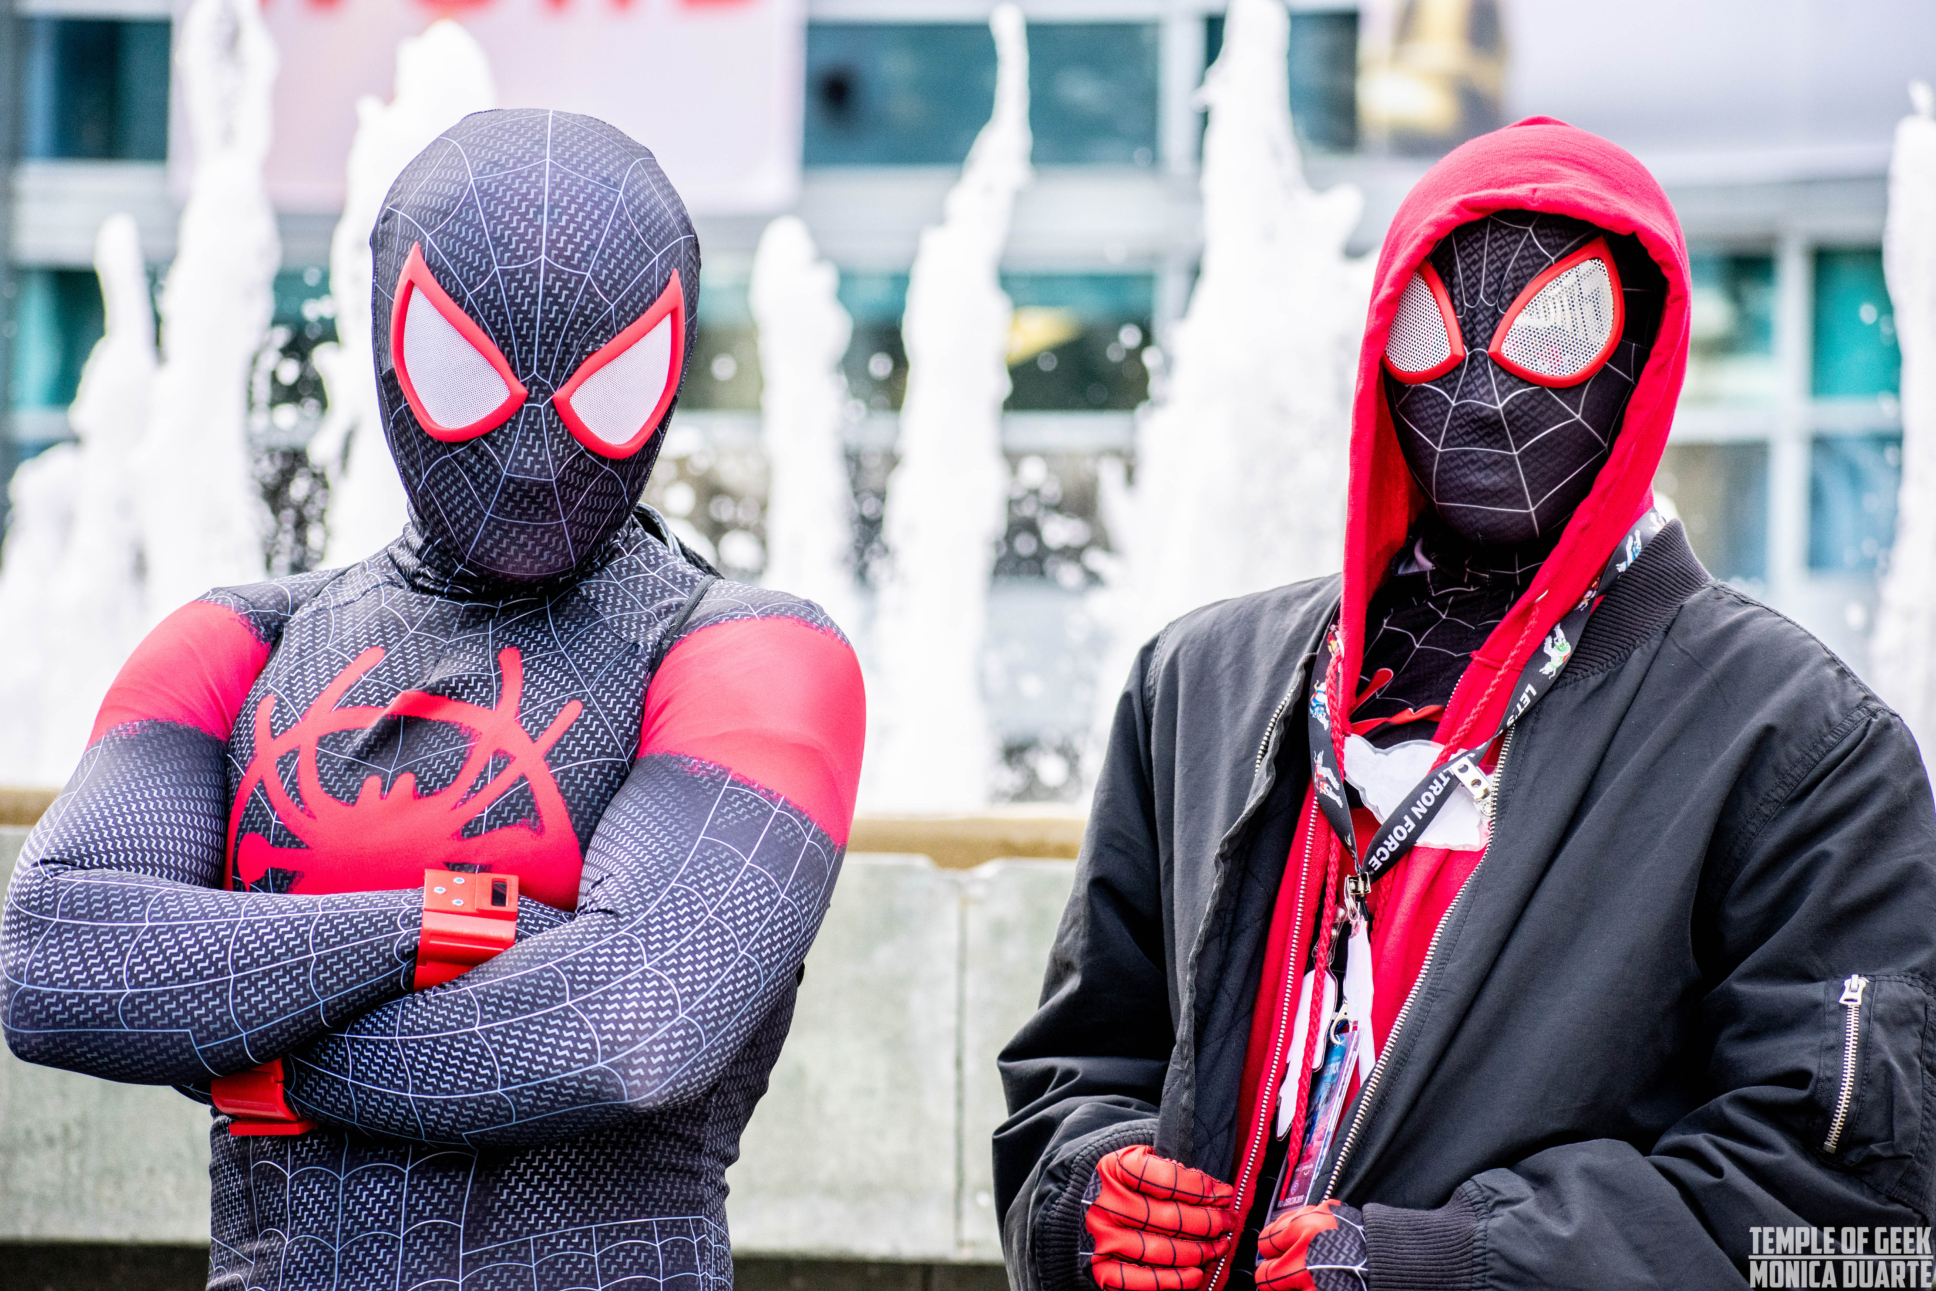 Two people dressed up as SpiderMan, Miles Morales, standing in front of 